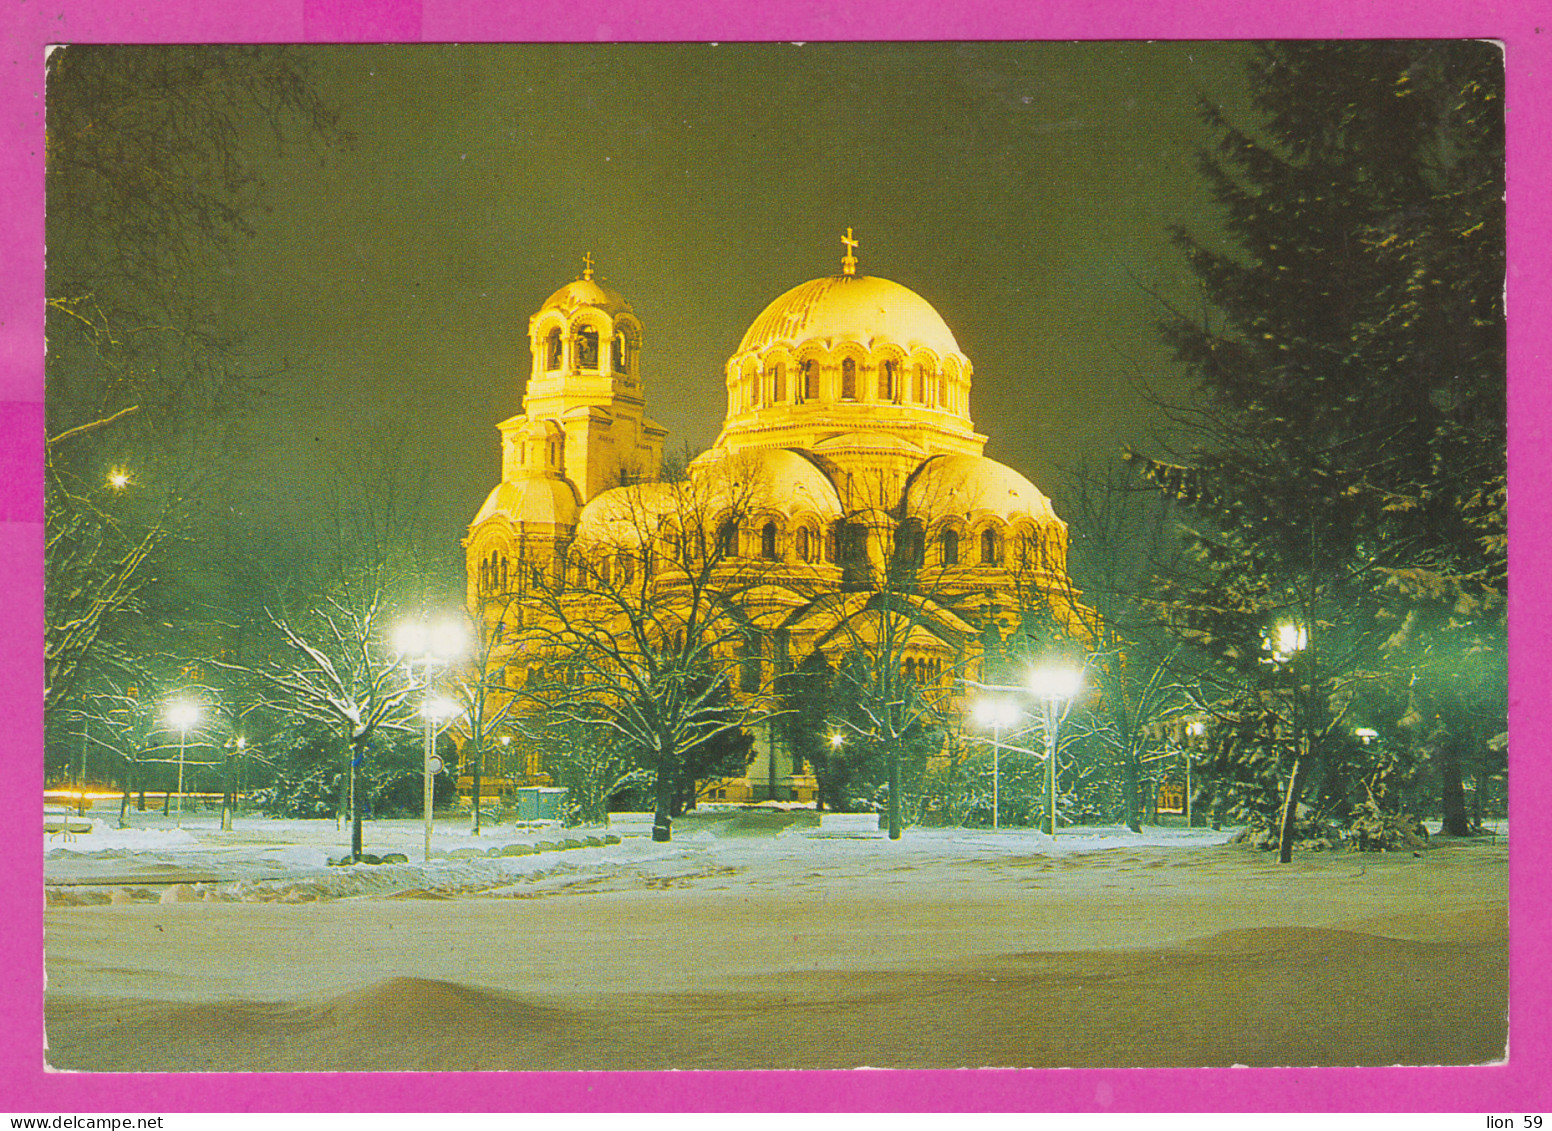 311290 / Bulgaria - Sofia - Winter Illuminate Patriarchal Cathedral Of "St. Alexander Nevsky" Building 1988 PC Septemvri - Churches & Cathedrals